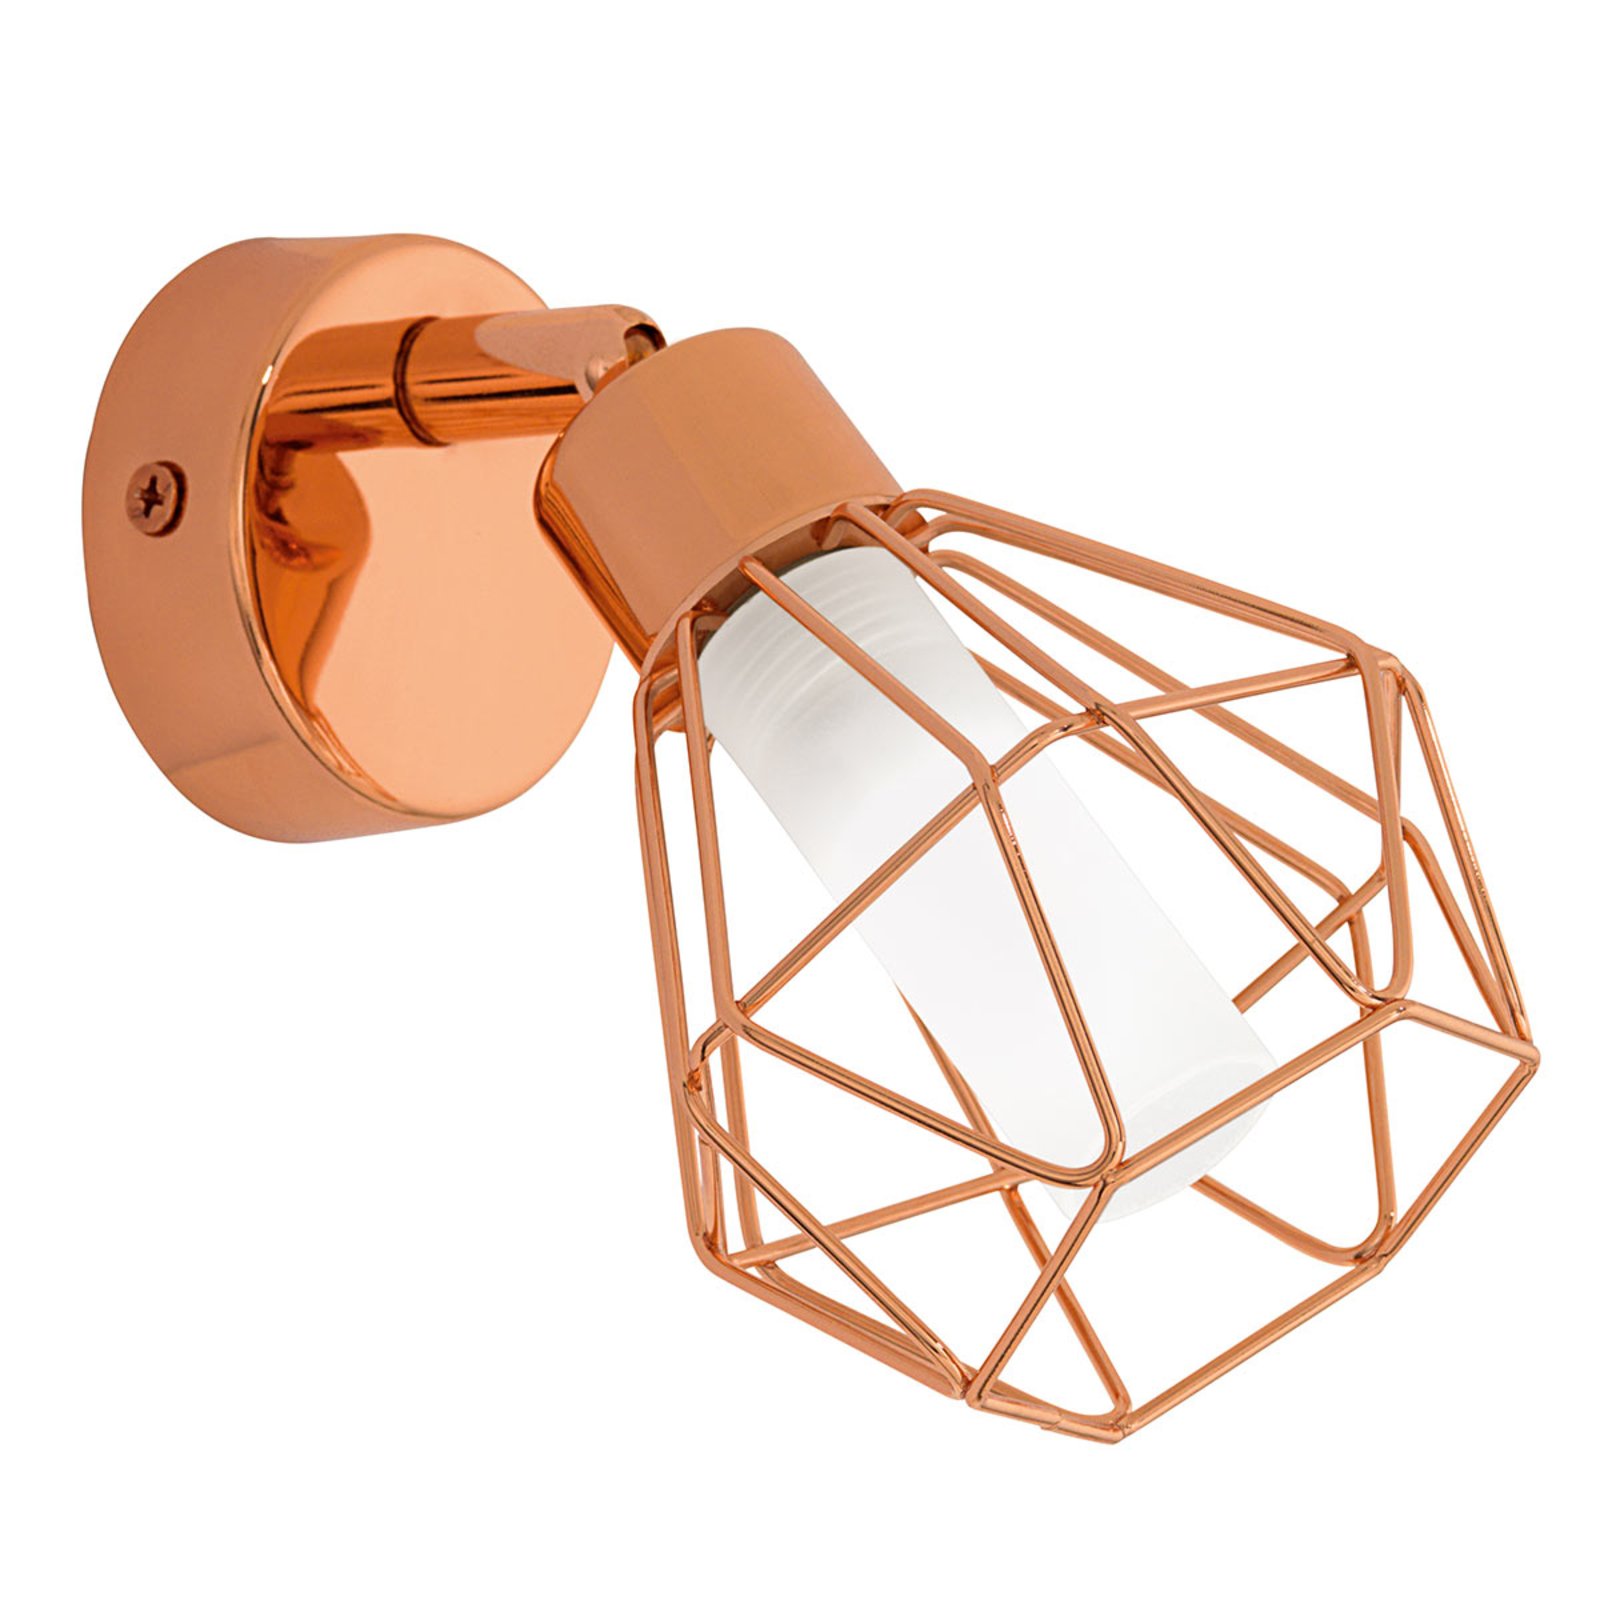 Copper-coloured Zapata LED wall light, cage look